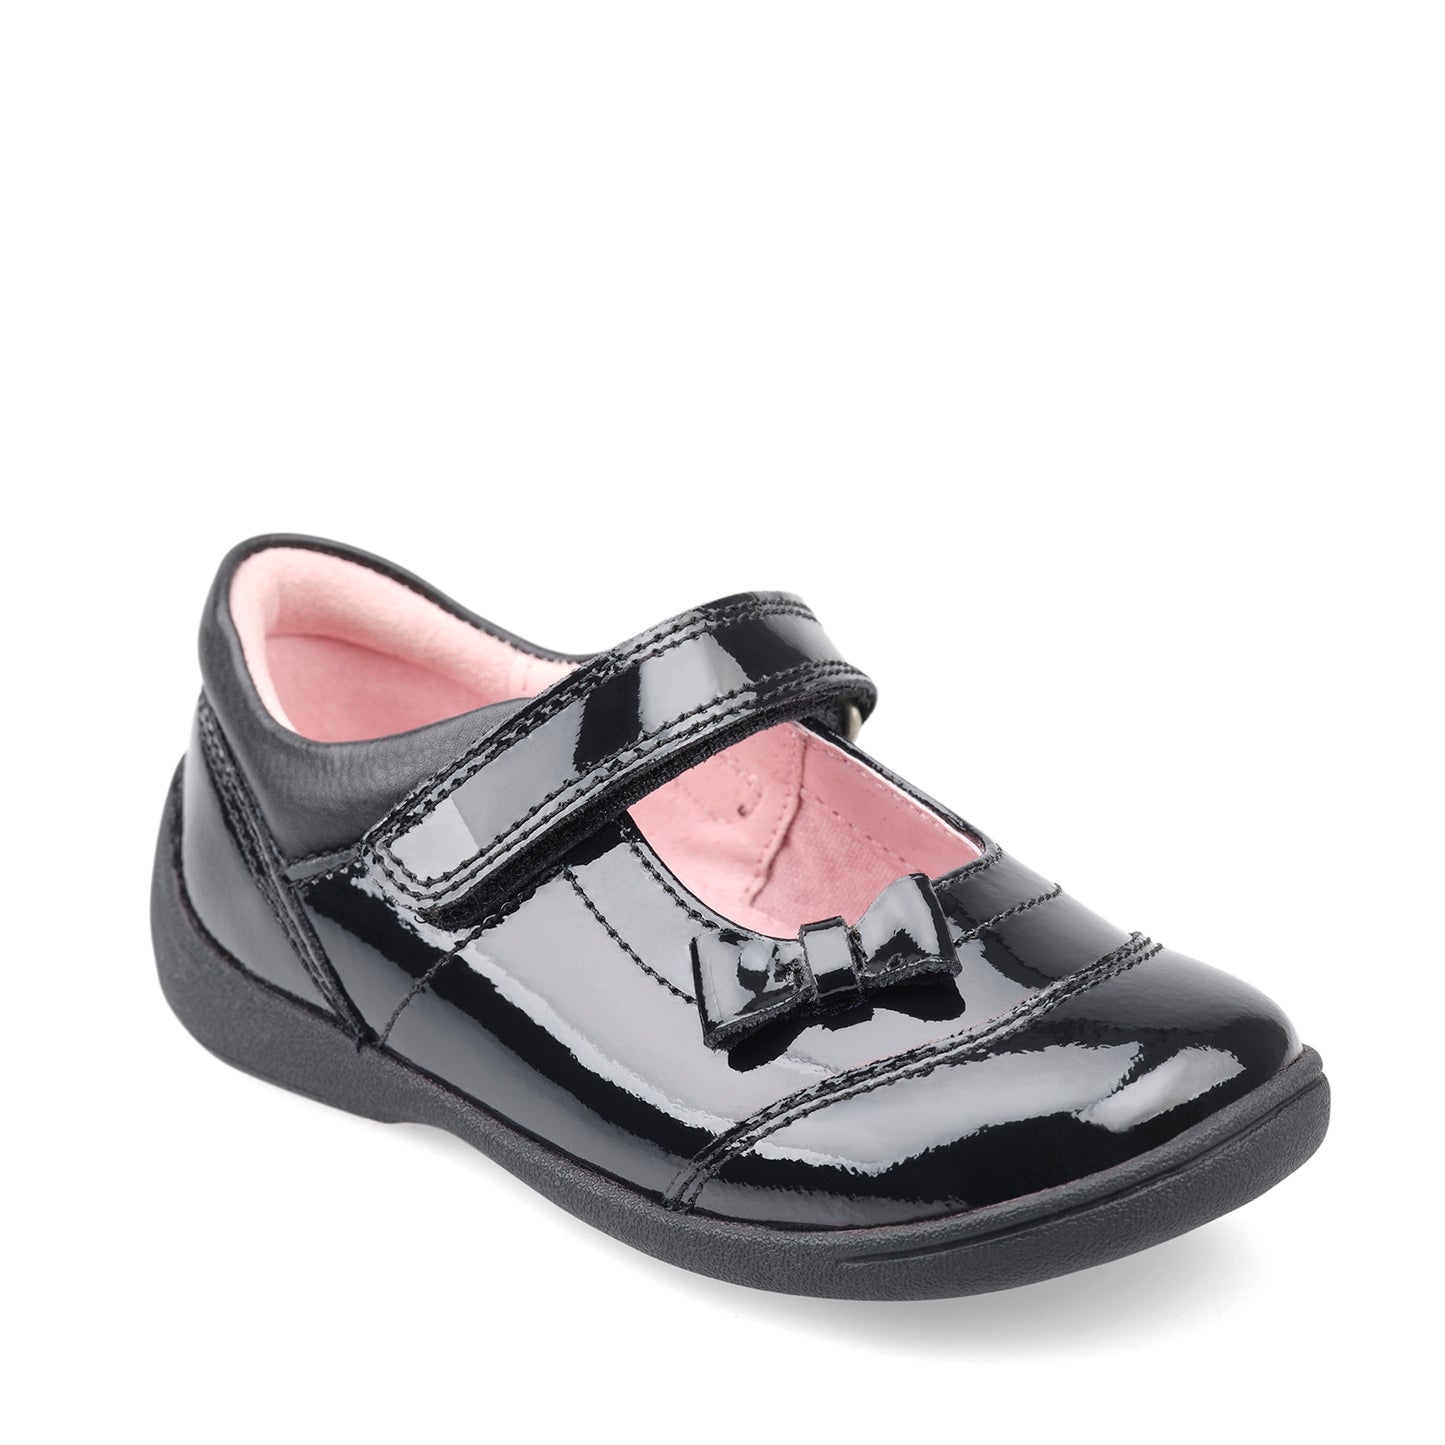 Twizzle Girl's Black Patent Leather First Shoe